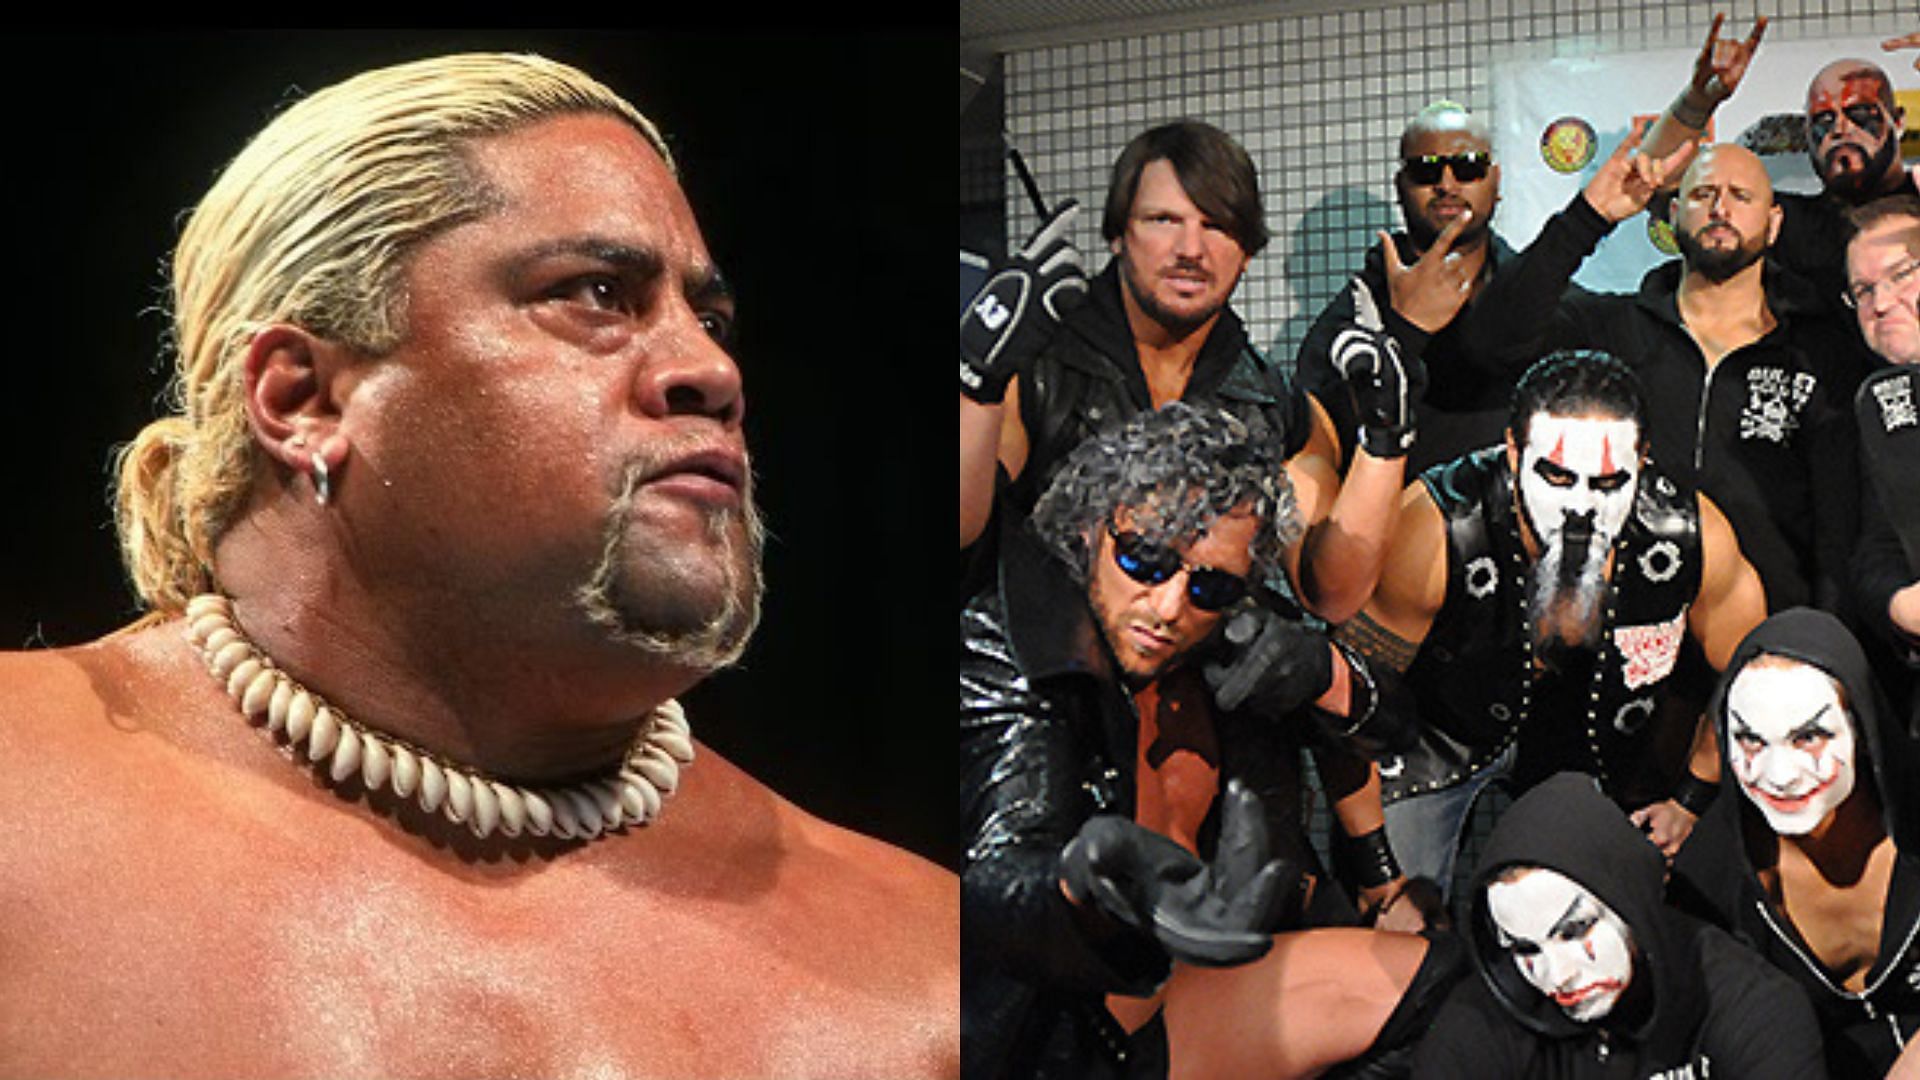 Rikishi sent a message to a former Bullet Club member